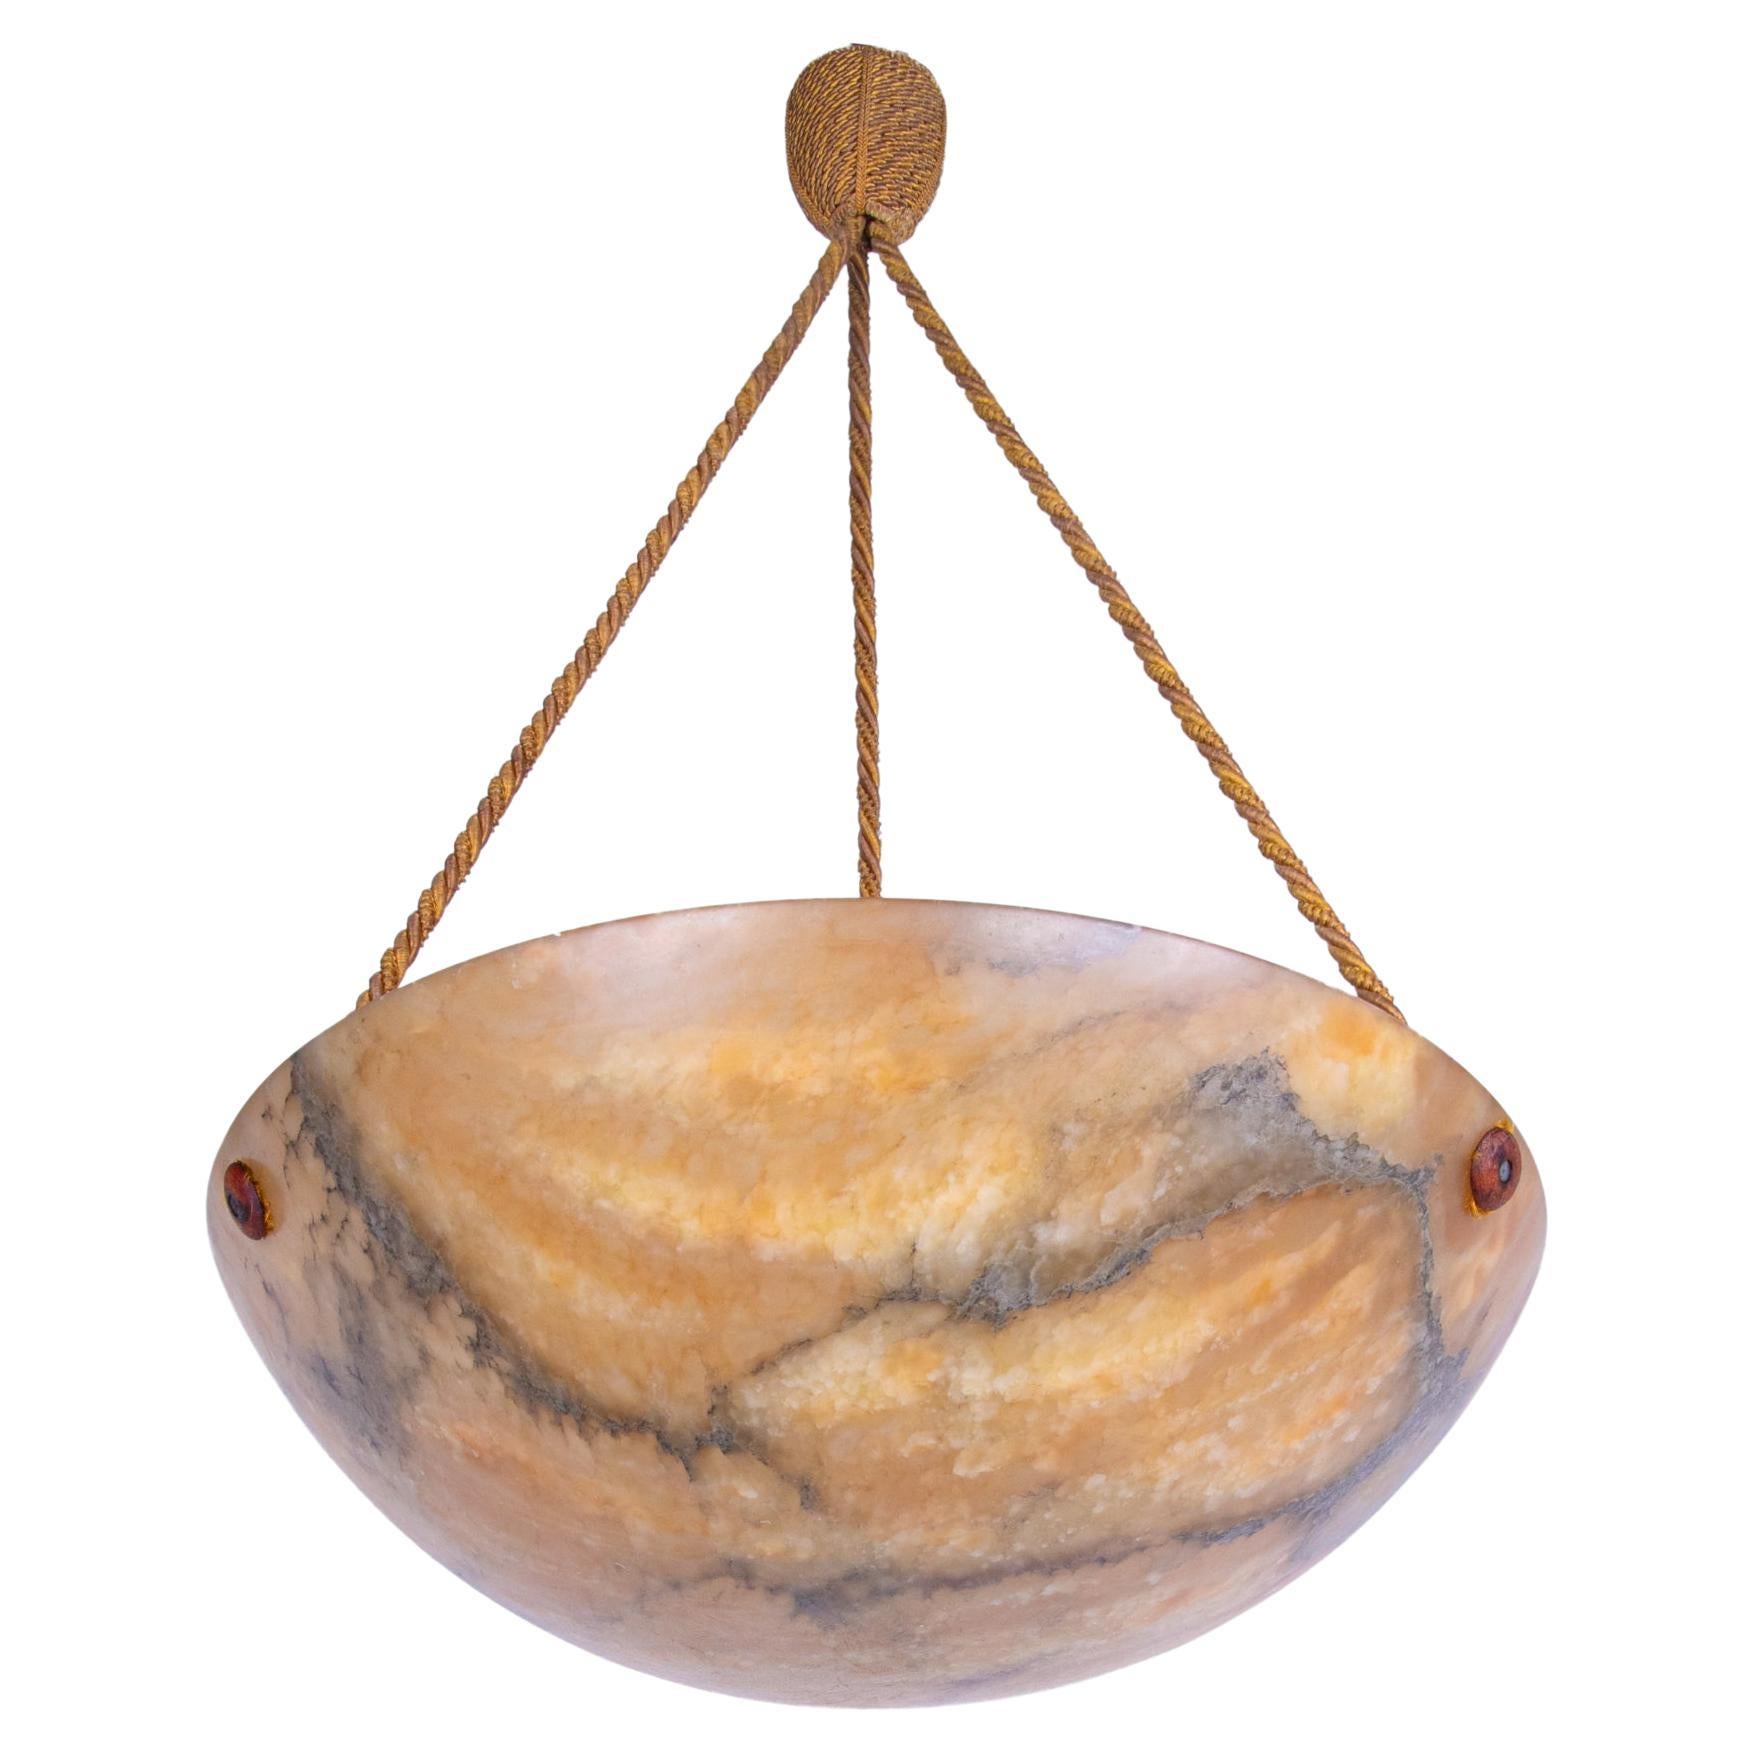 Antique carved Alabaster Art Deco ceiling light with the original, hand-knotted rope. The pendant spreads a fantastic ambient light. An absolute eye-catcher even when unlit. 

Materials: Alabaster. 
Measures: diameter 15.75